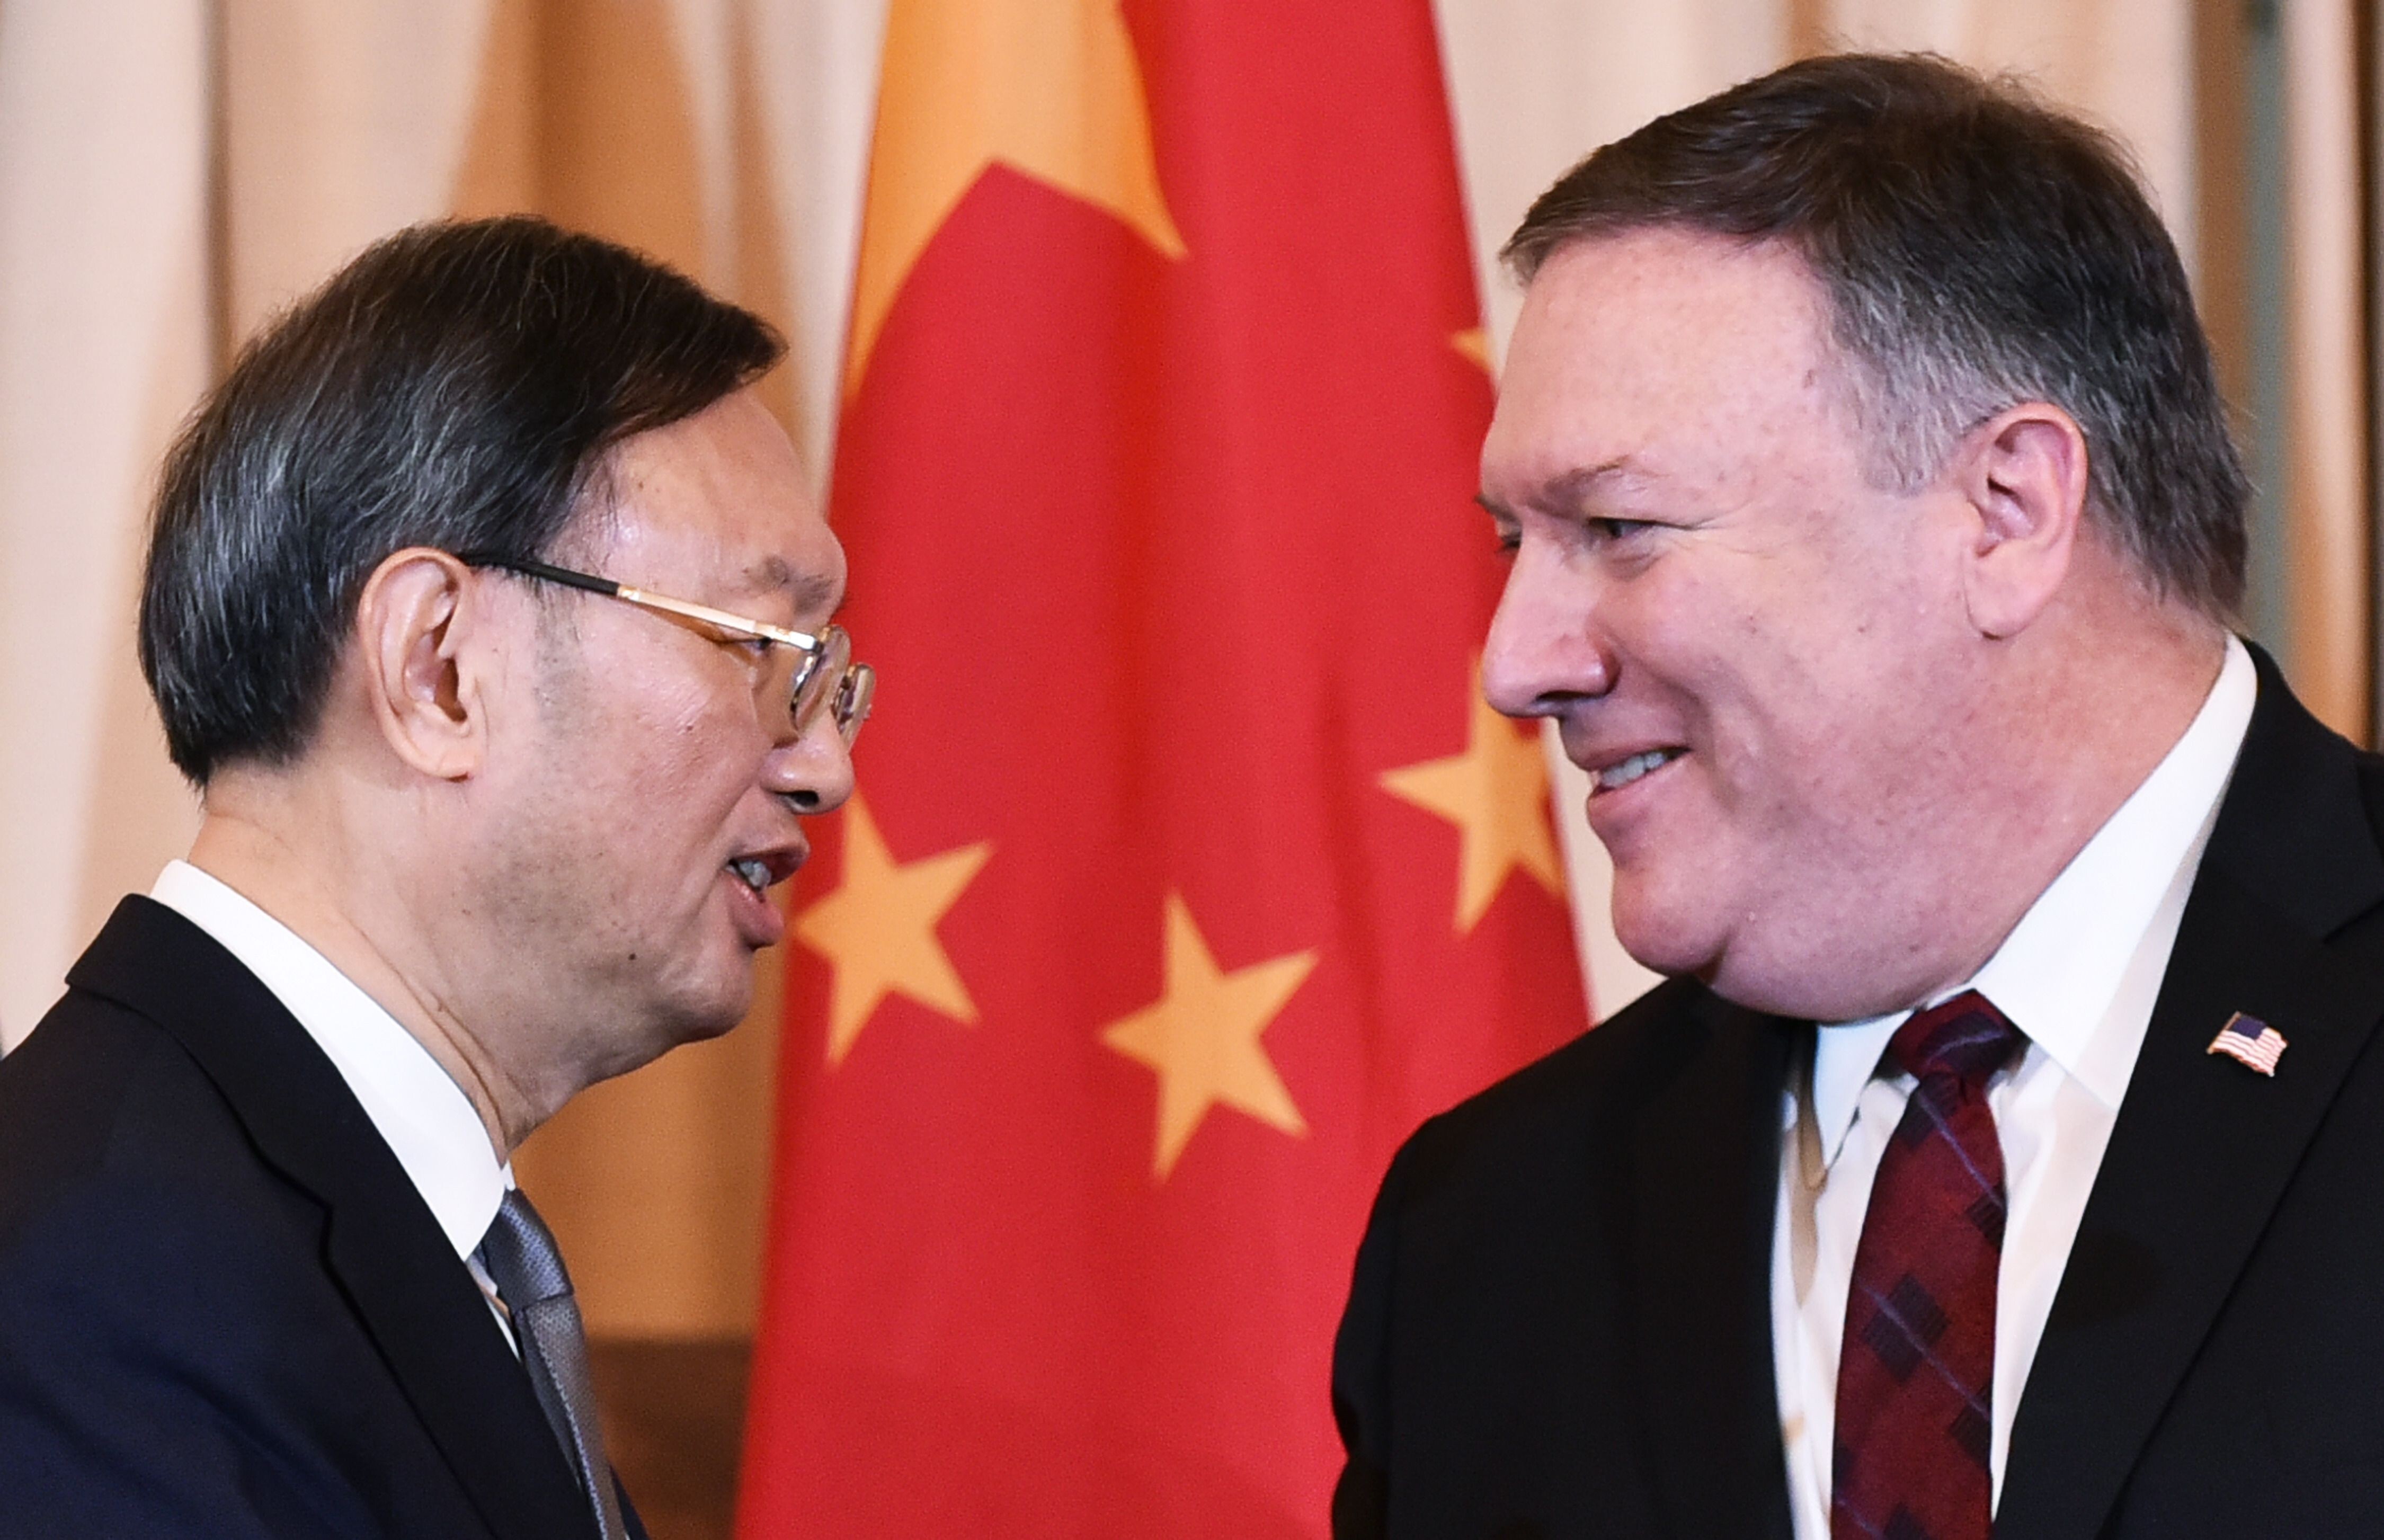 Yang Jiechi and US Secretary of State Mike Pompeo shake hands following a press conference at the US State Department in Washington in November 2018. Photo: AFP